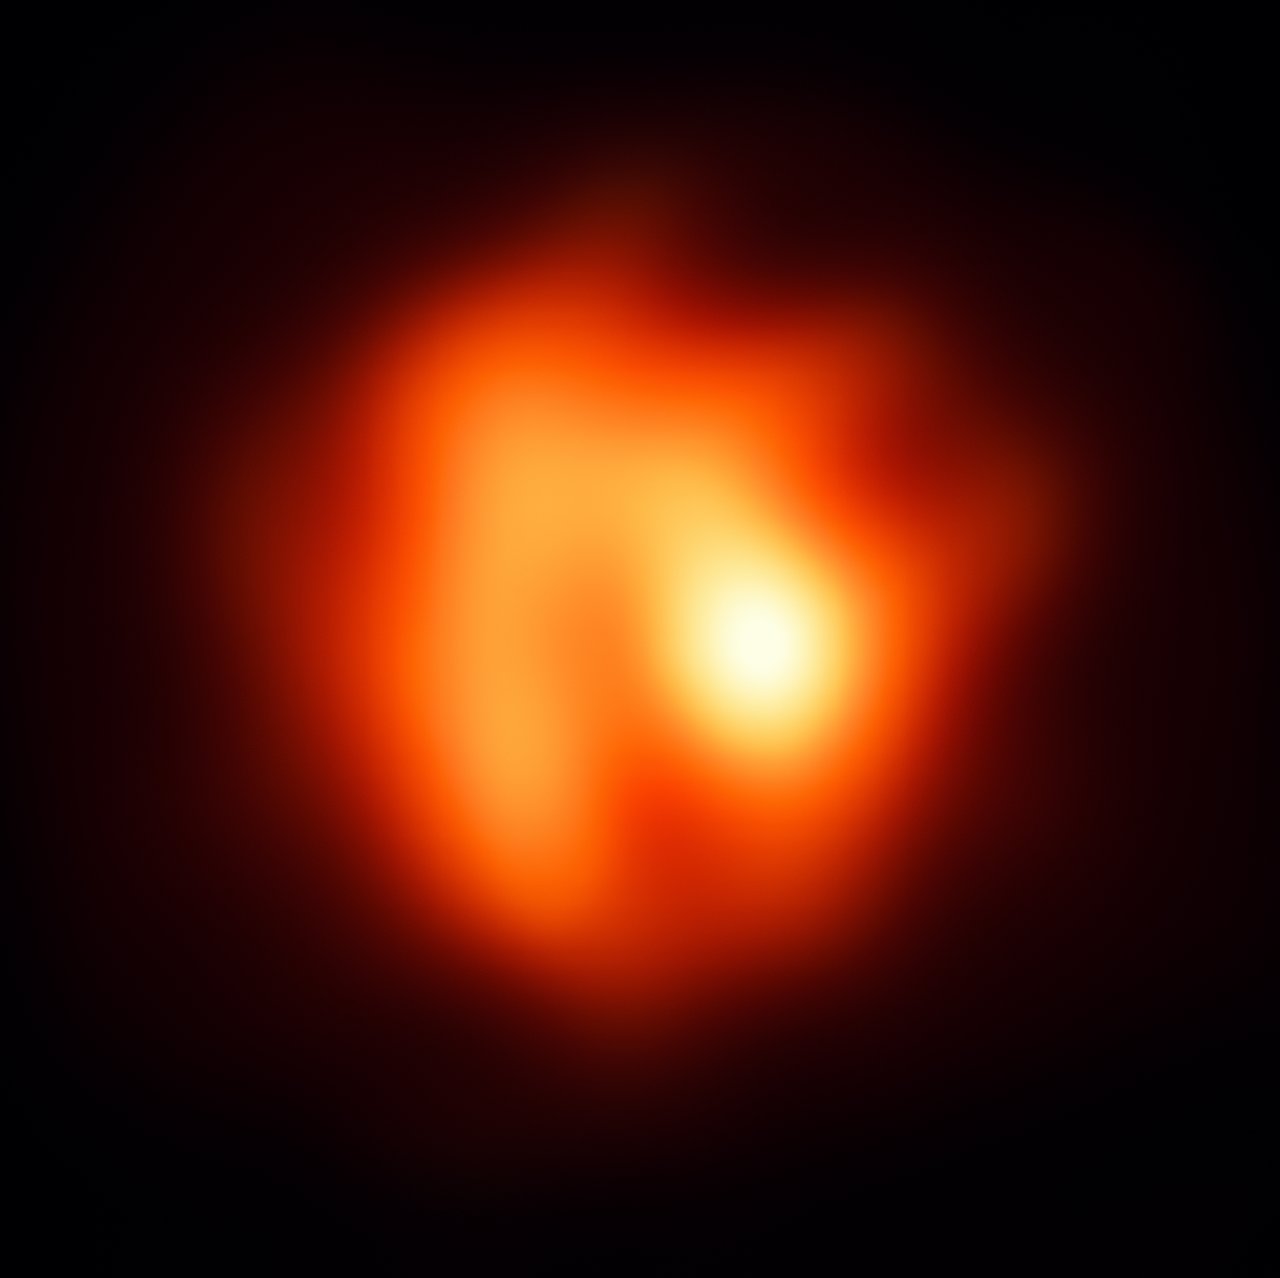 A red giant sheds its skin